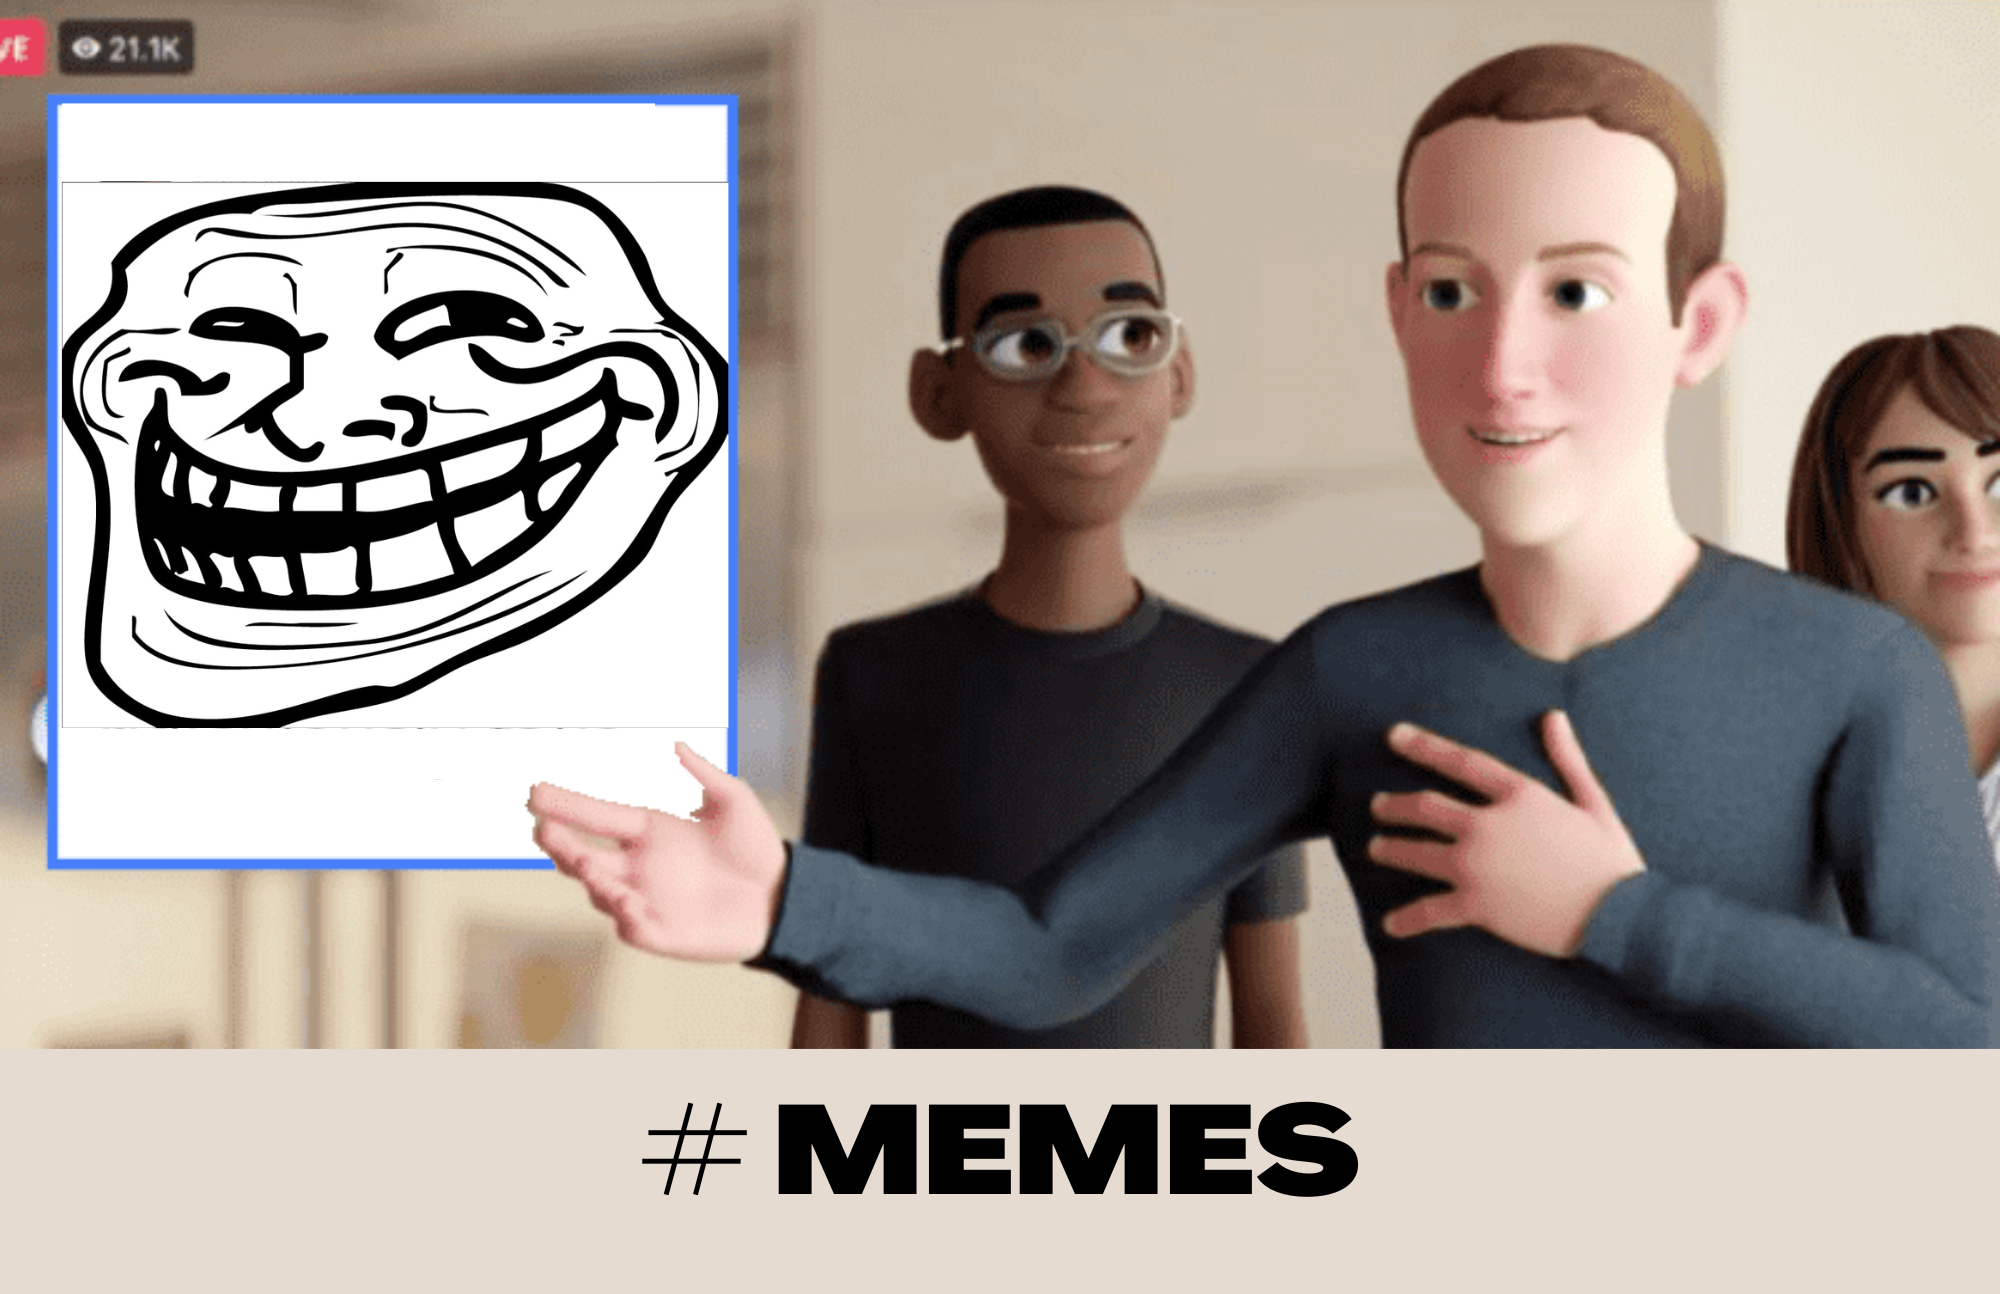 Metaverse Property - Here Are 8 Memes That Will Break Down The Aura Of The Virtual World